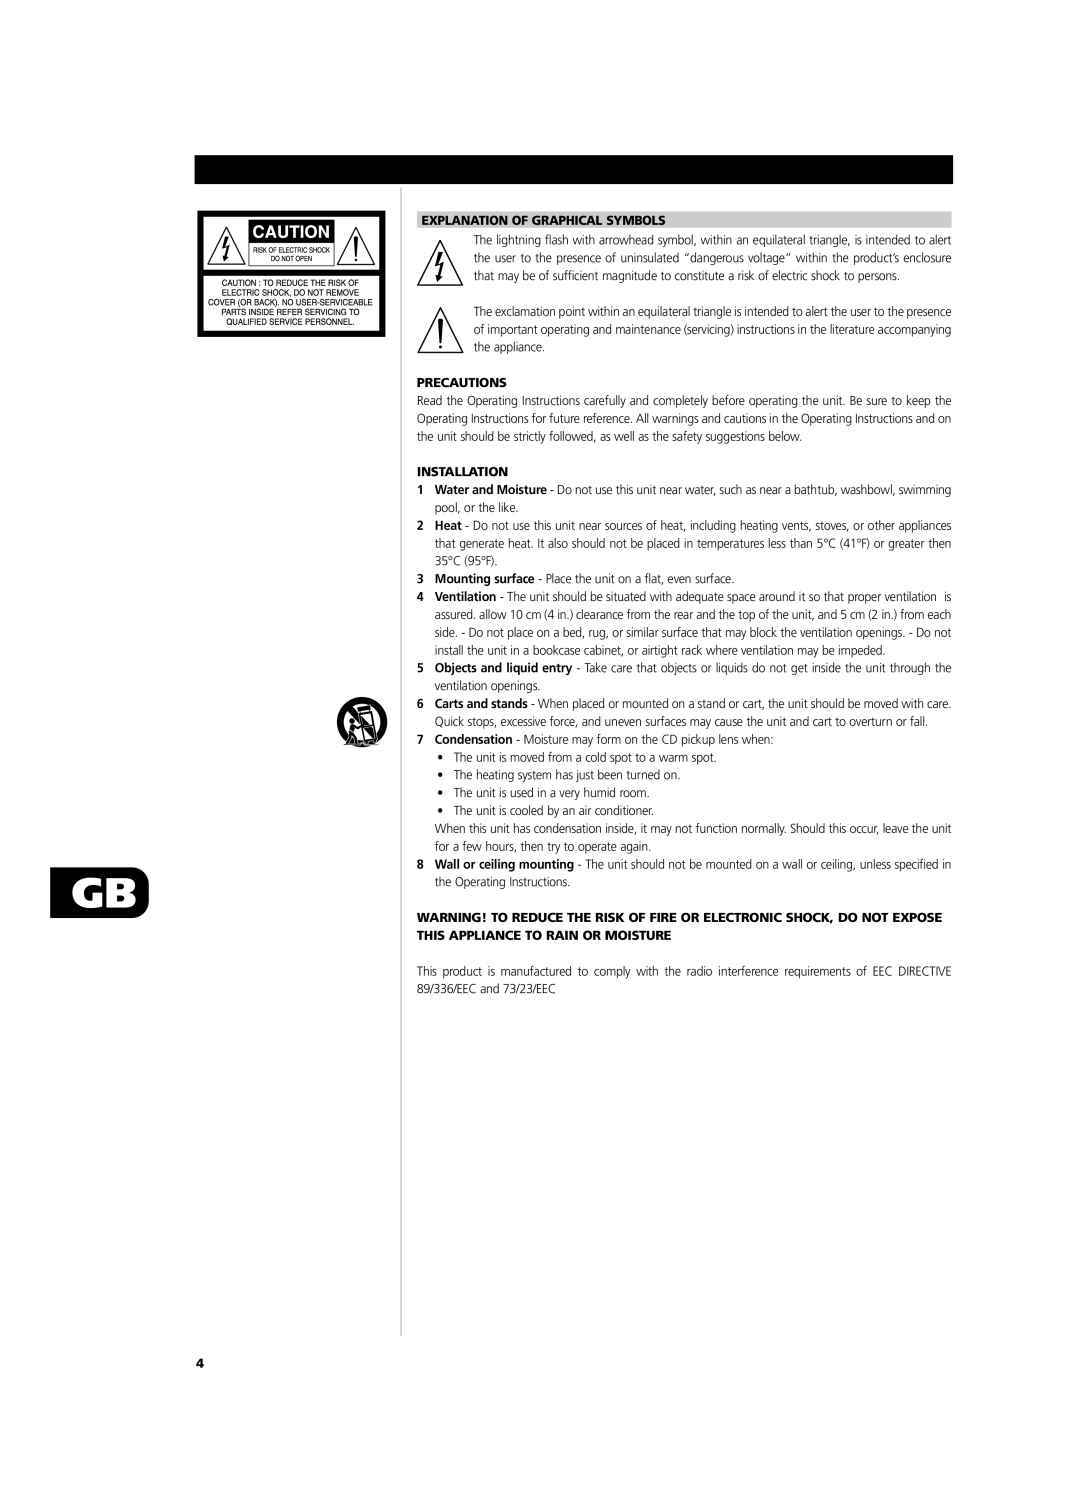 NAD T741 owner manual Explanation Of Graphical Symbols, Precautions, Installation 